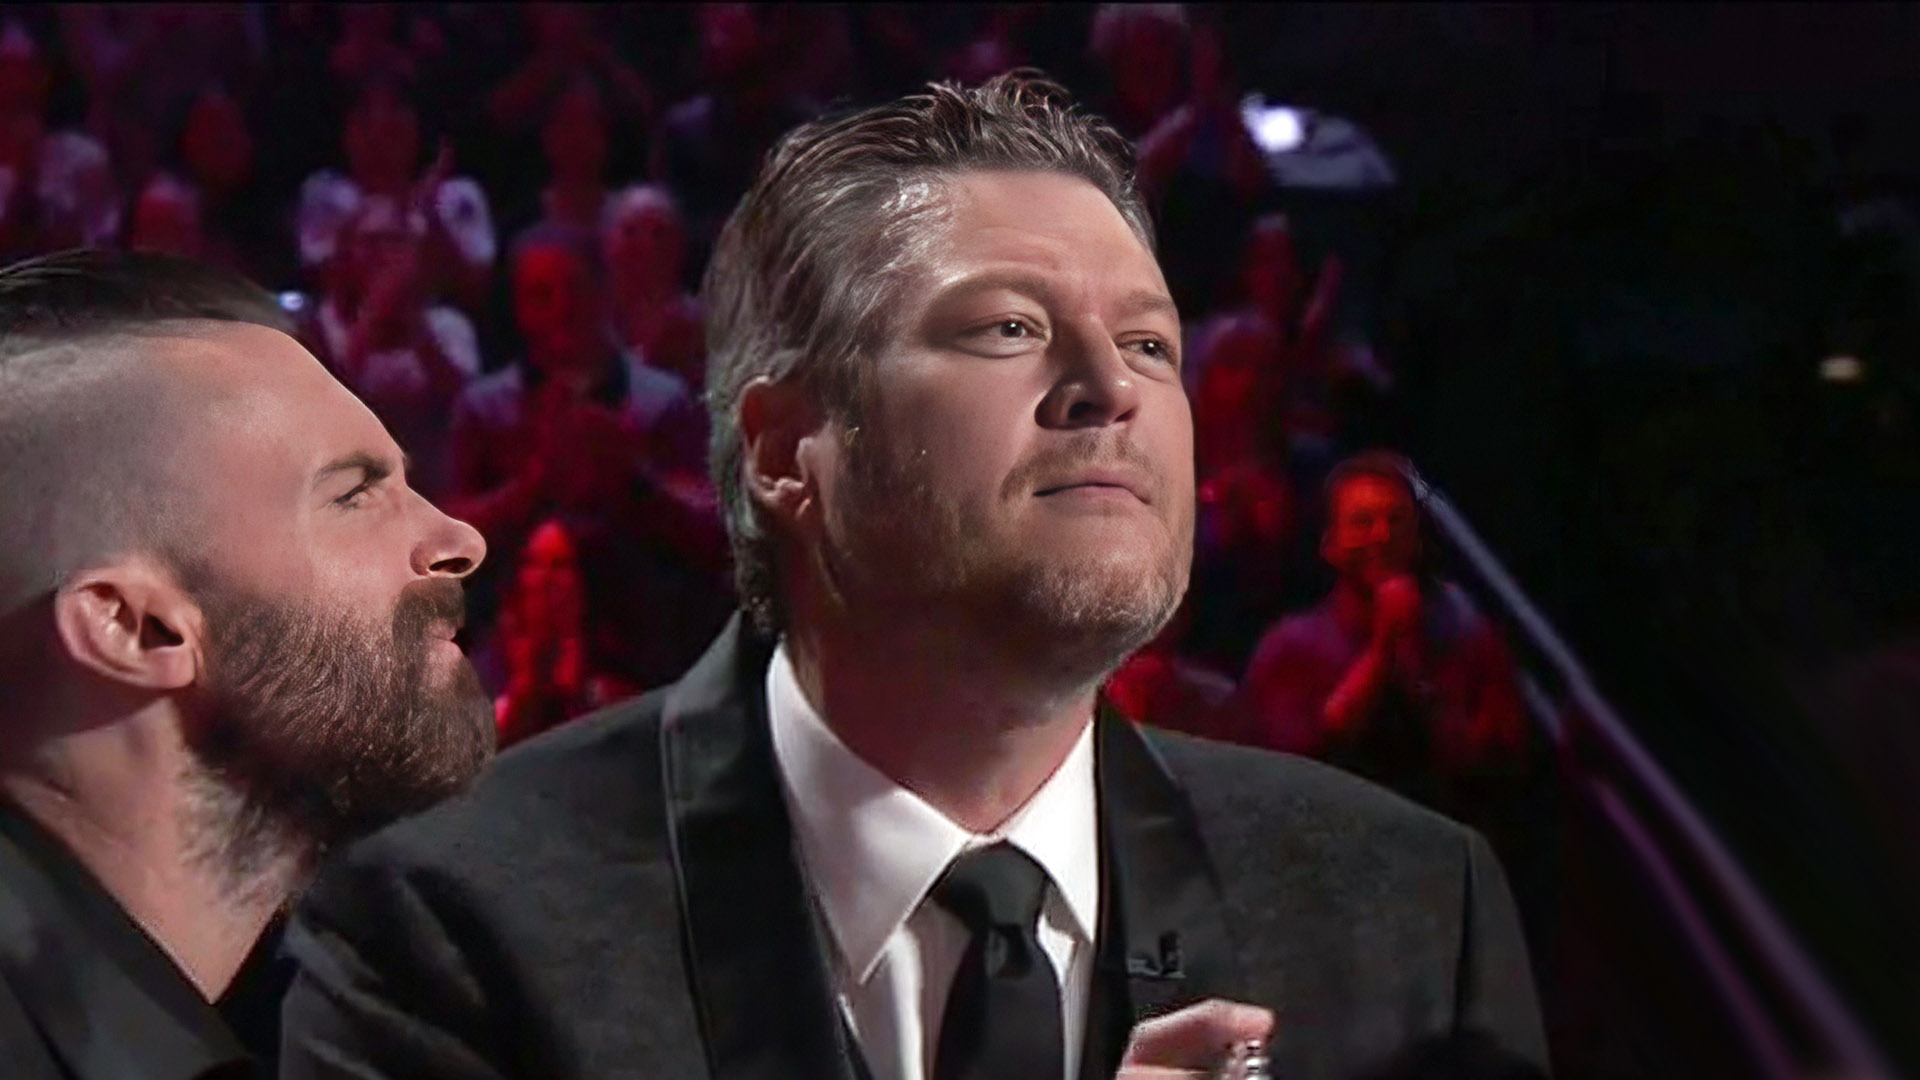 There's a Simple Reason Behind Blake Shelton Winning The Voice So Many Times